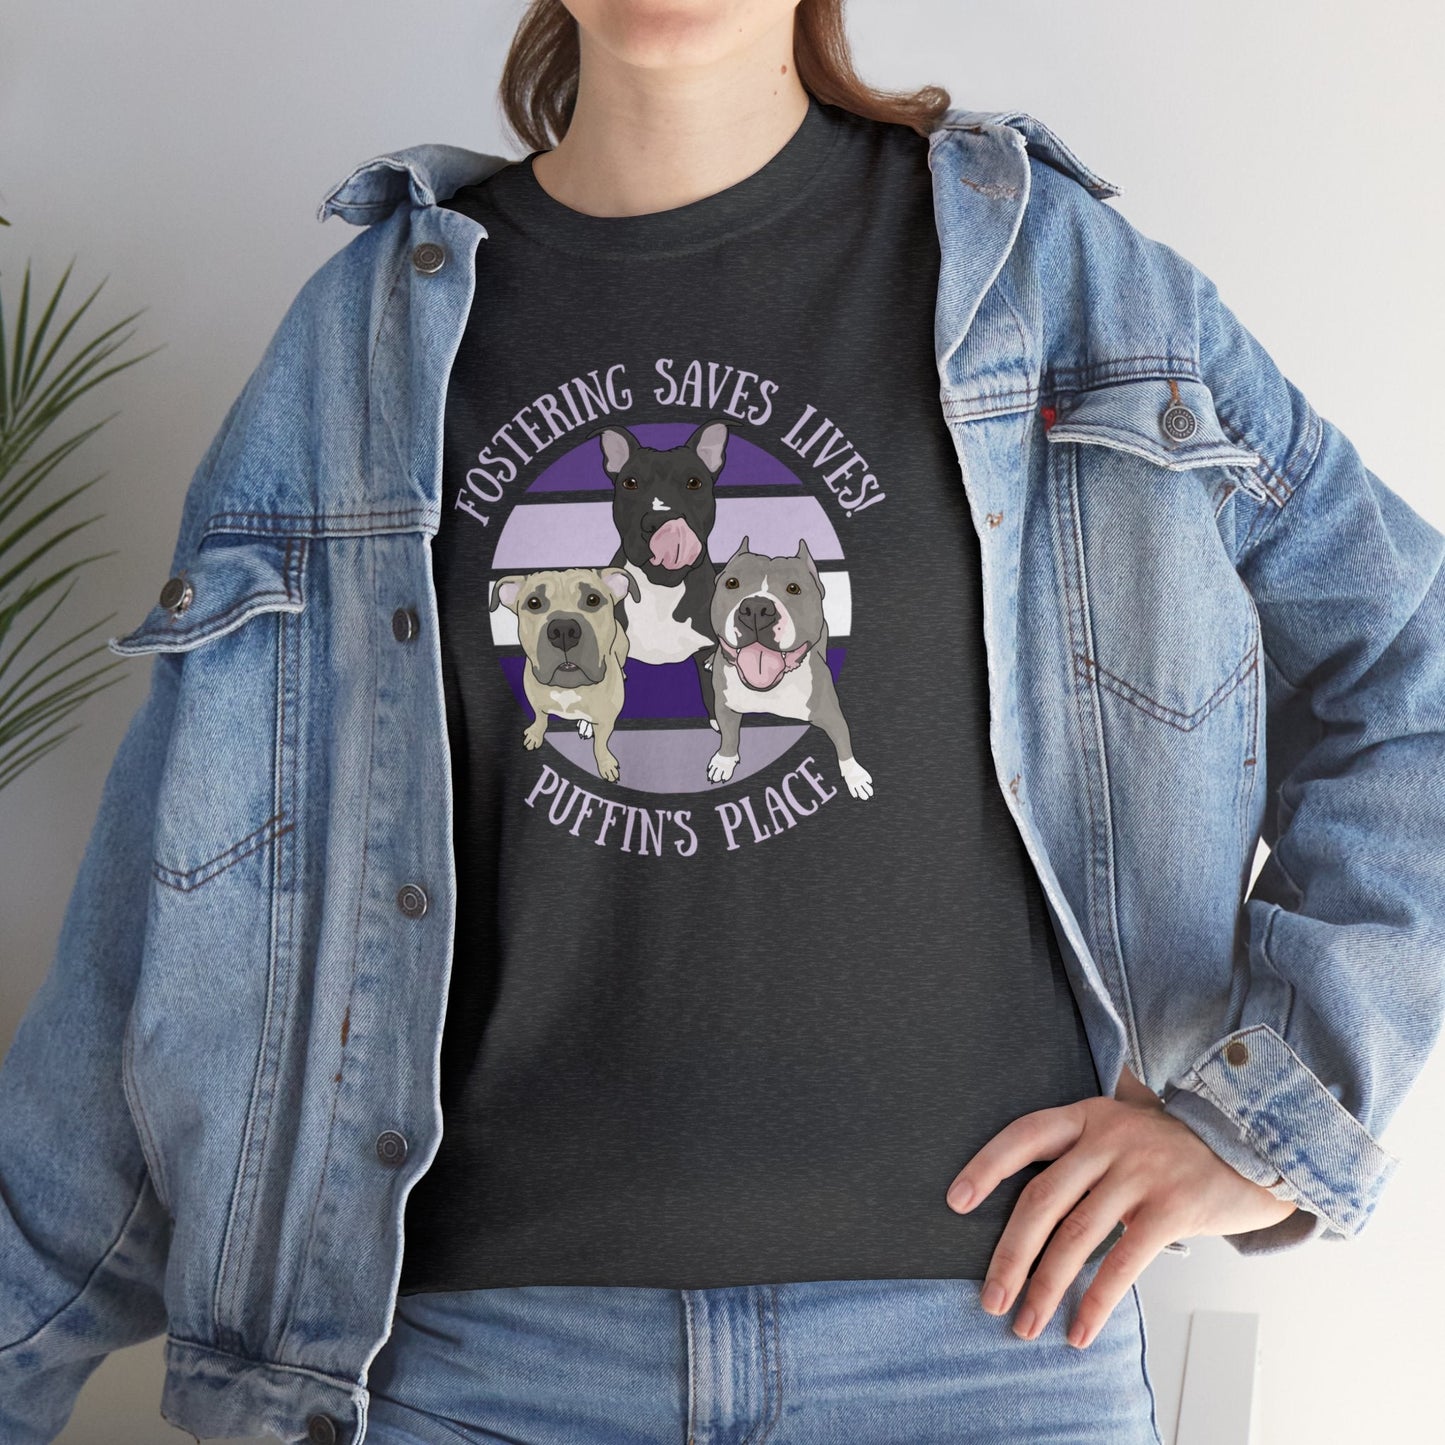 Puffin's Place | FUNDRAISER for Philly Bully Team | T-shirt - Detezi Designs-24931996877933160265